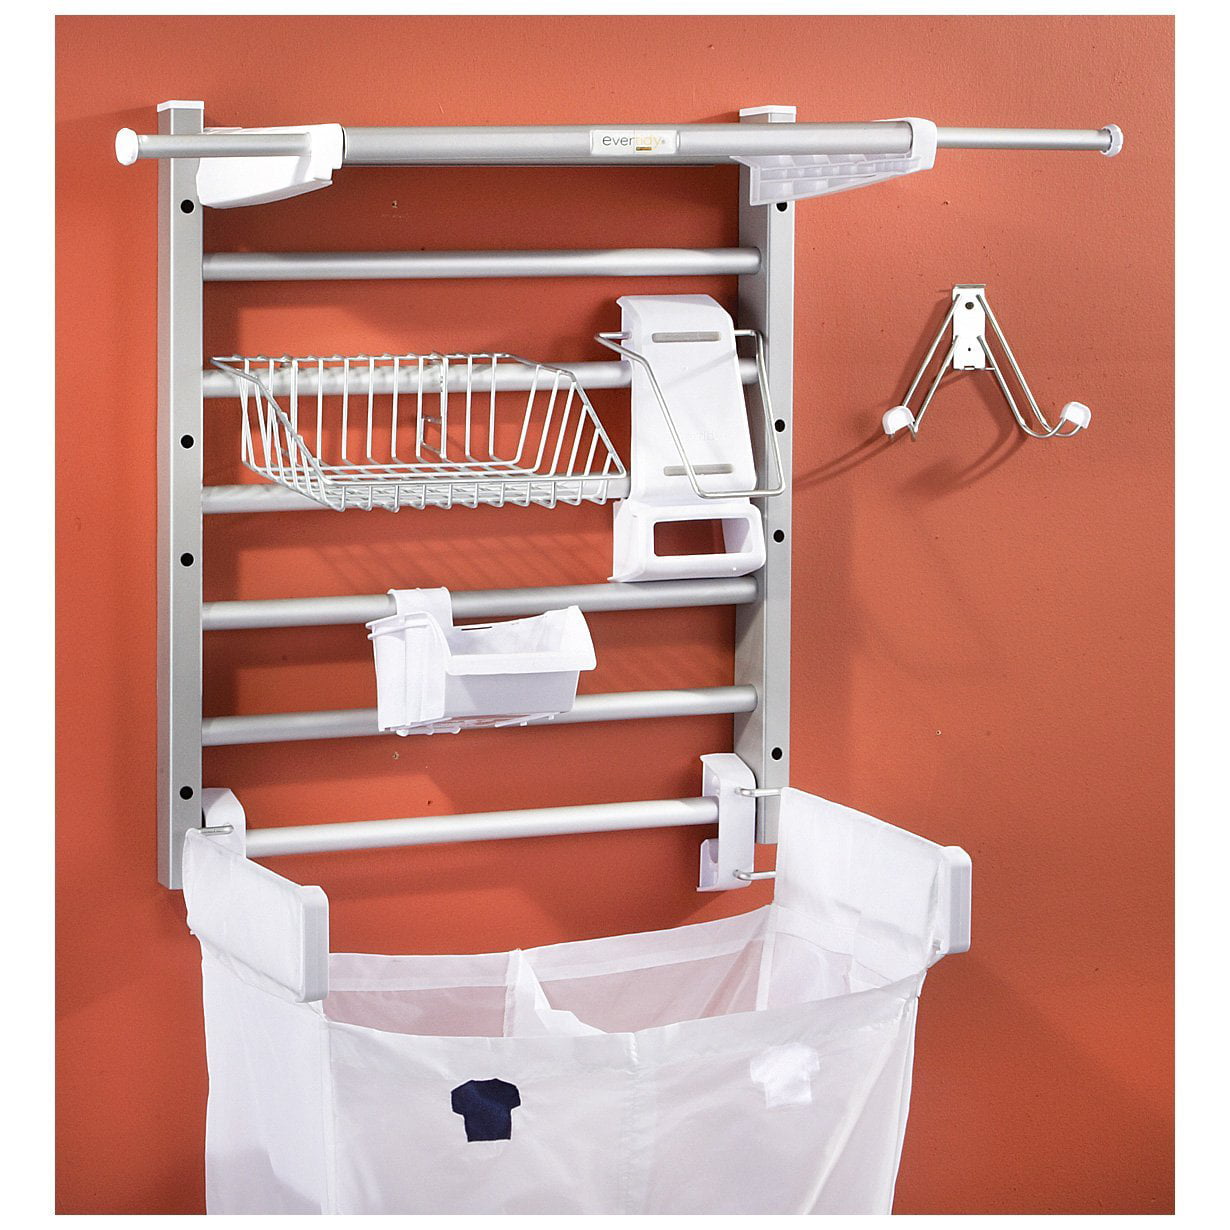 Evertidy Laundry and Ironing Smart Organizer System for sale online 